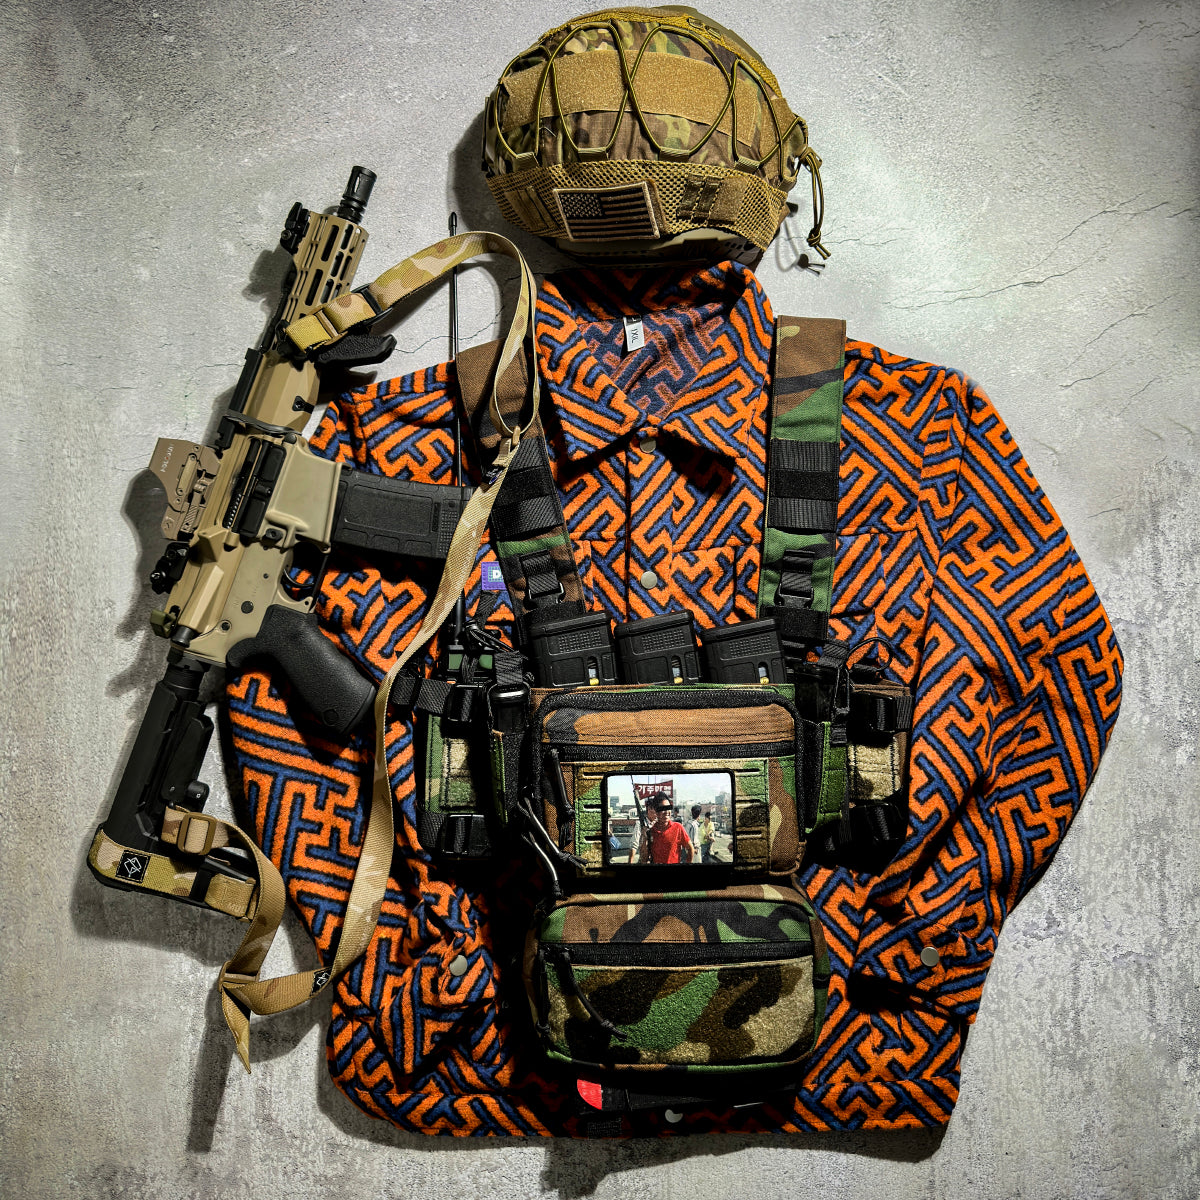 Experience Ultimate Versatility With The S.O.P. Micro Chest Rig – ACETAC